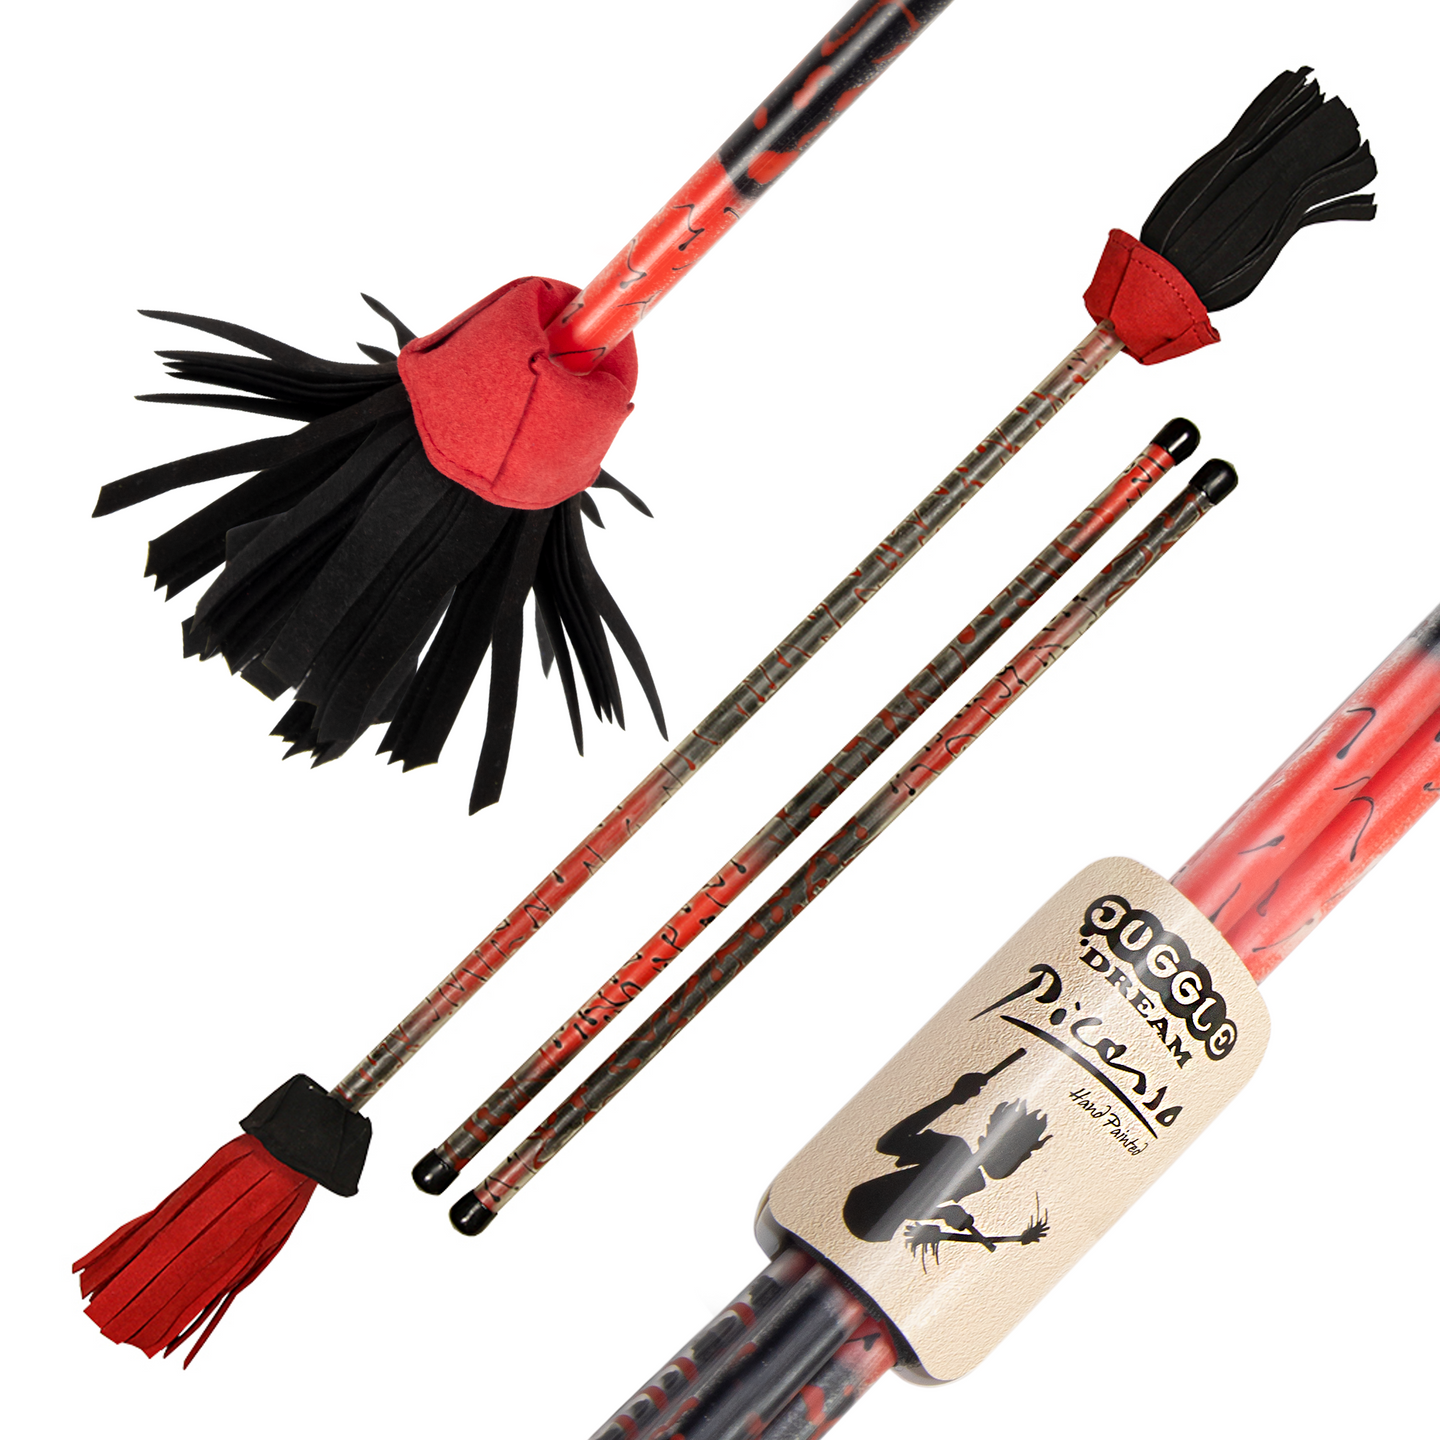 Black/ Red Full size Picasso Flower Stick with Handsticks with close-up of label and tassels